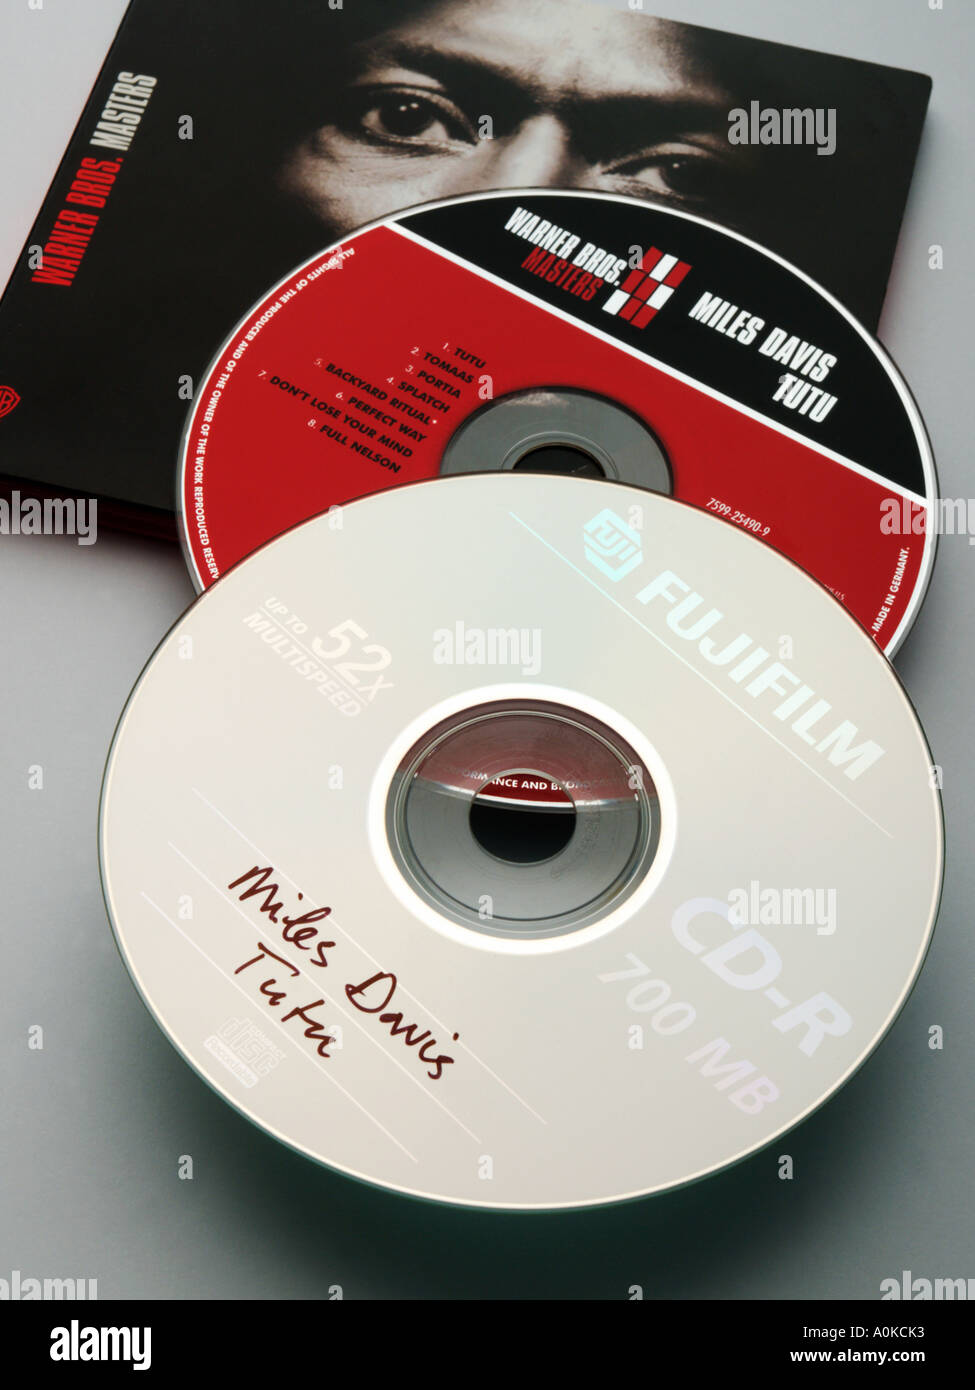 https://c8.alamy.com/comp/A0KCK3/famous-artist-cd-audio-music-recording-with-illegal-home-made-copy-A0KCK3.jpg